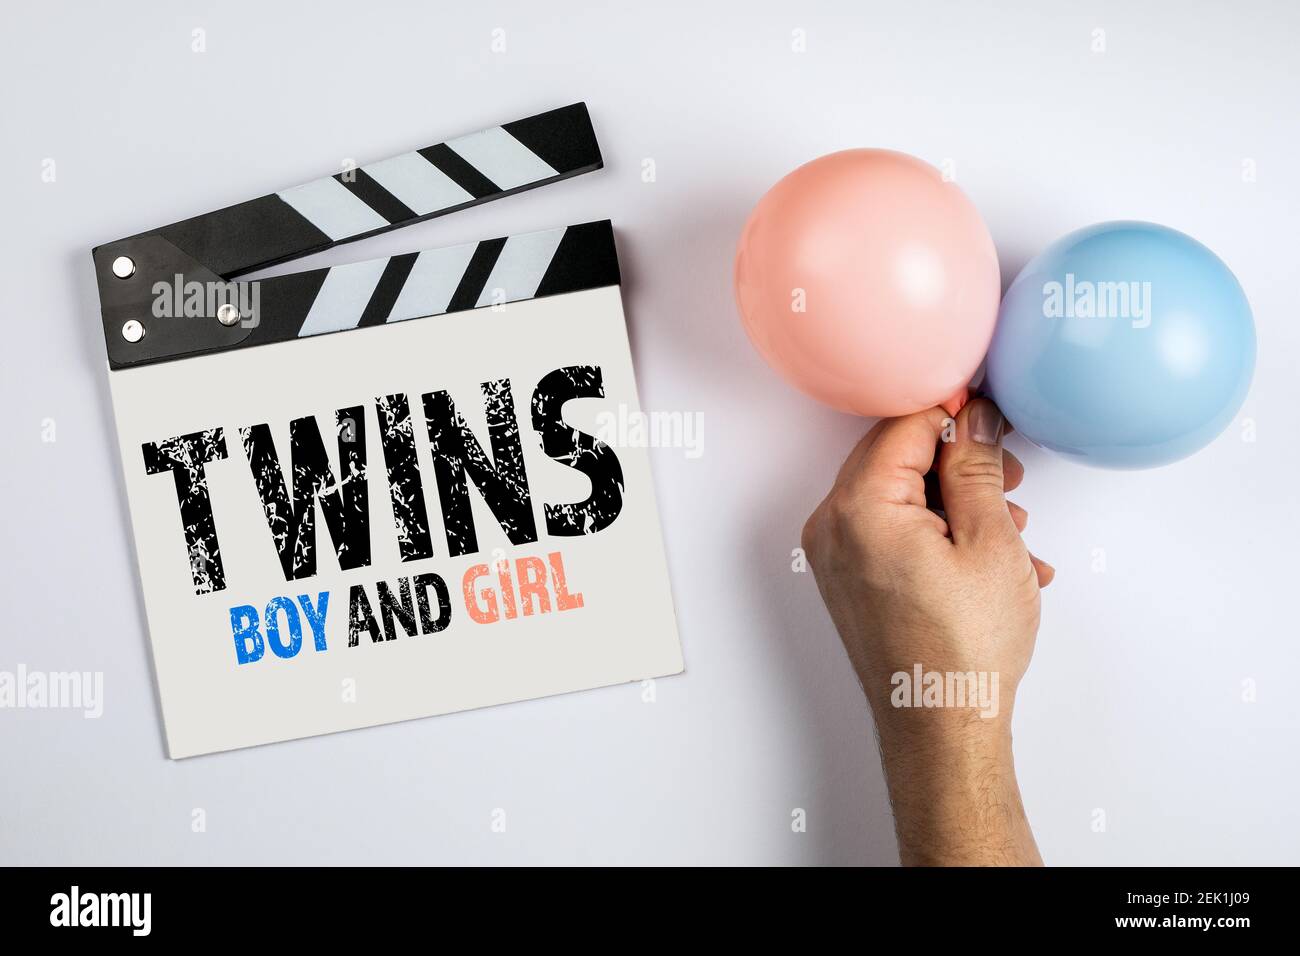 Twins, Boy and Girl. Birthday and sonographic examination concept. Movie clapper, pink and blue balloon on a white background. Stock Photo